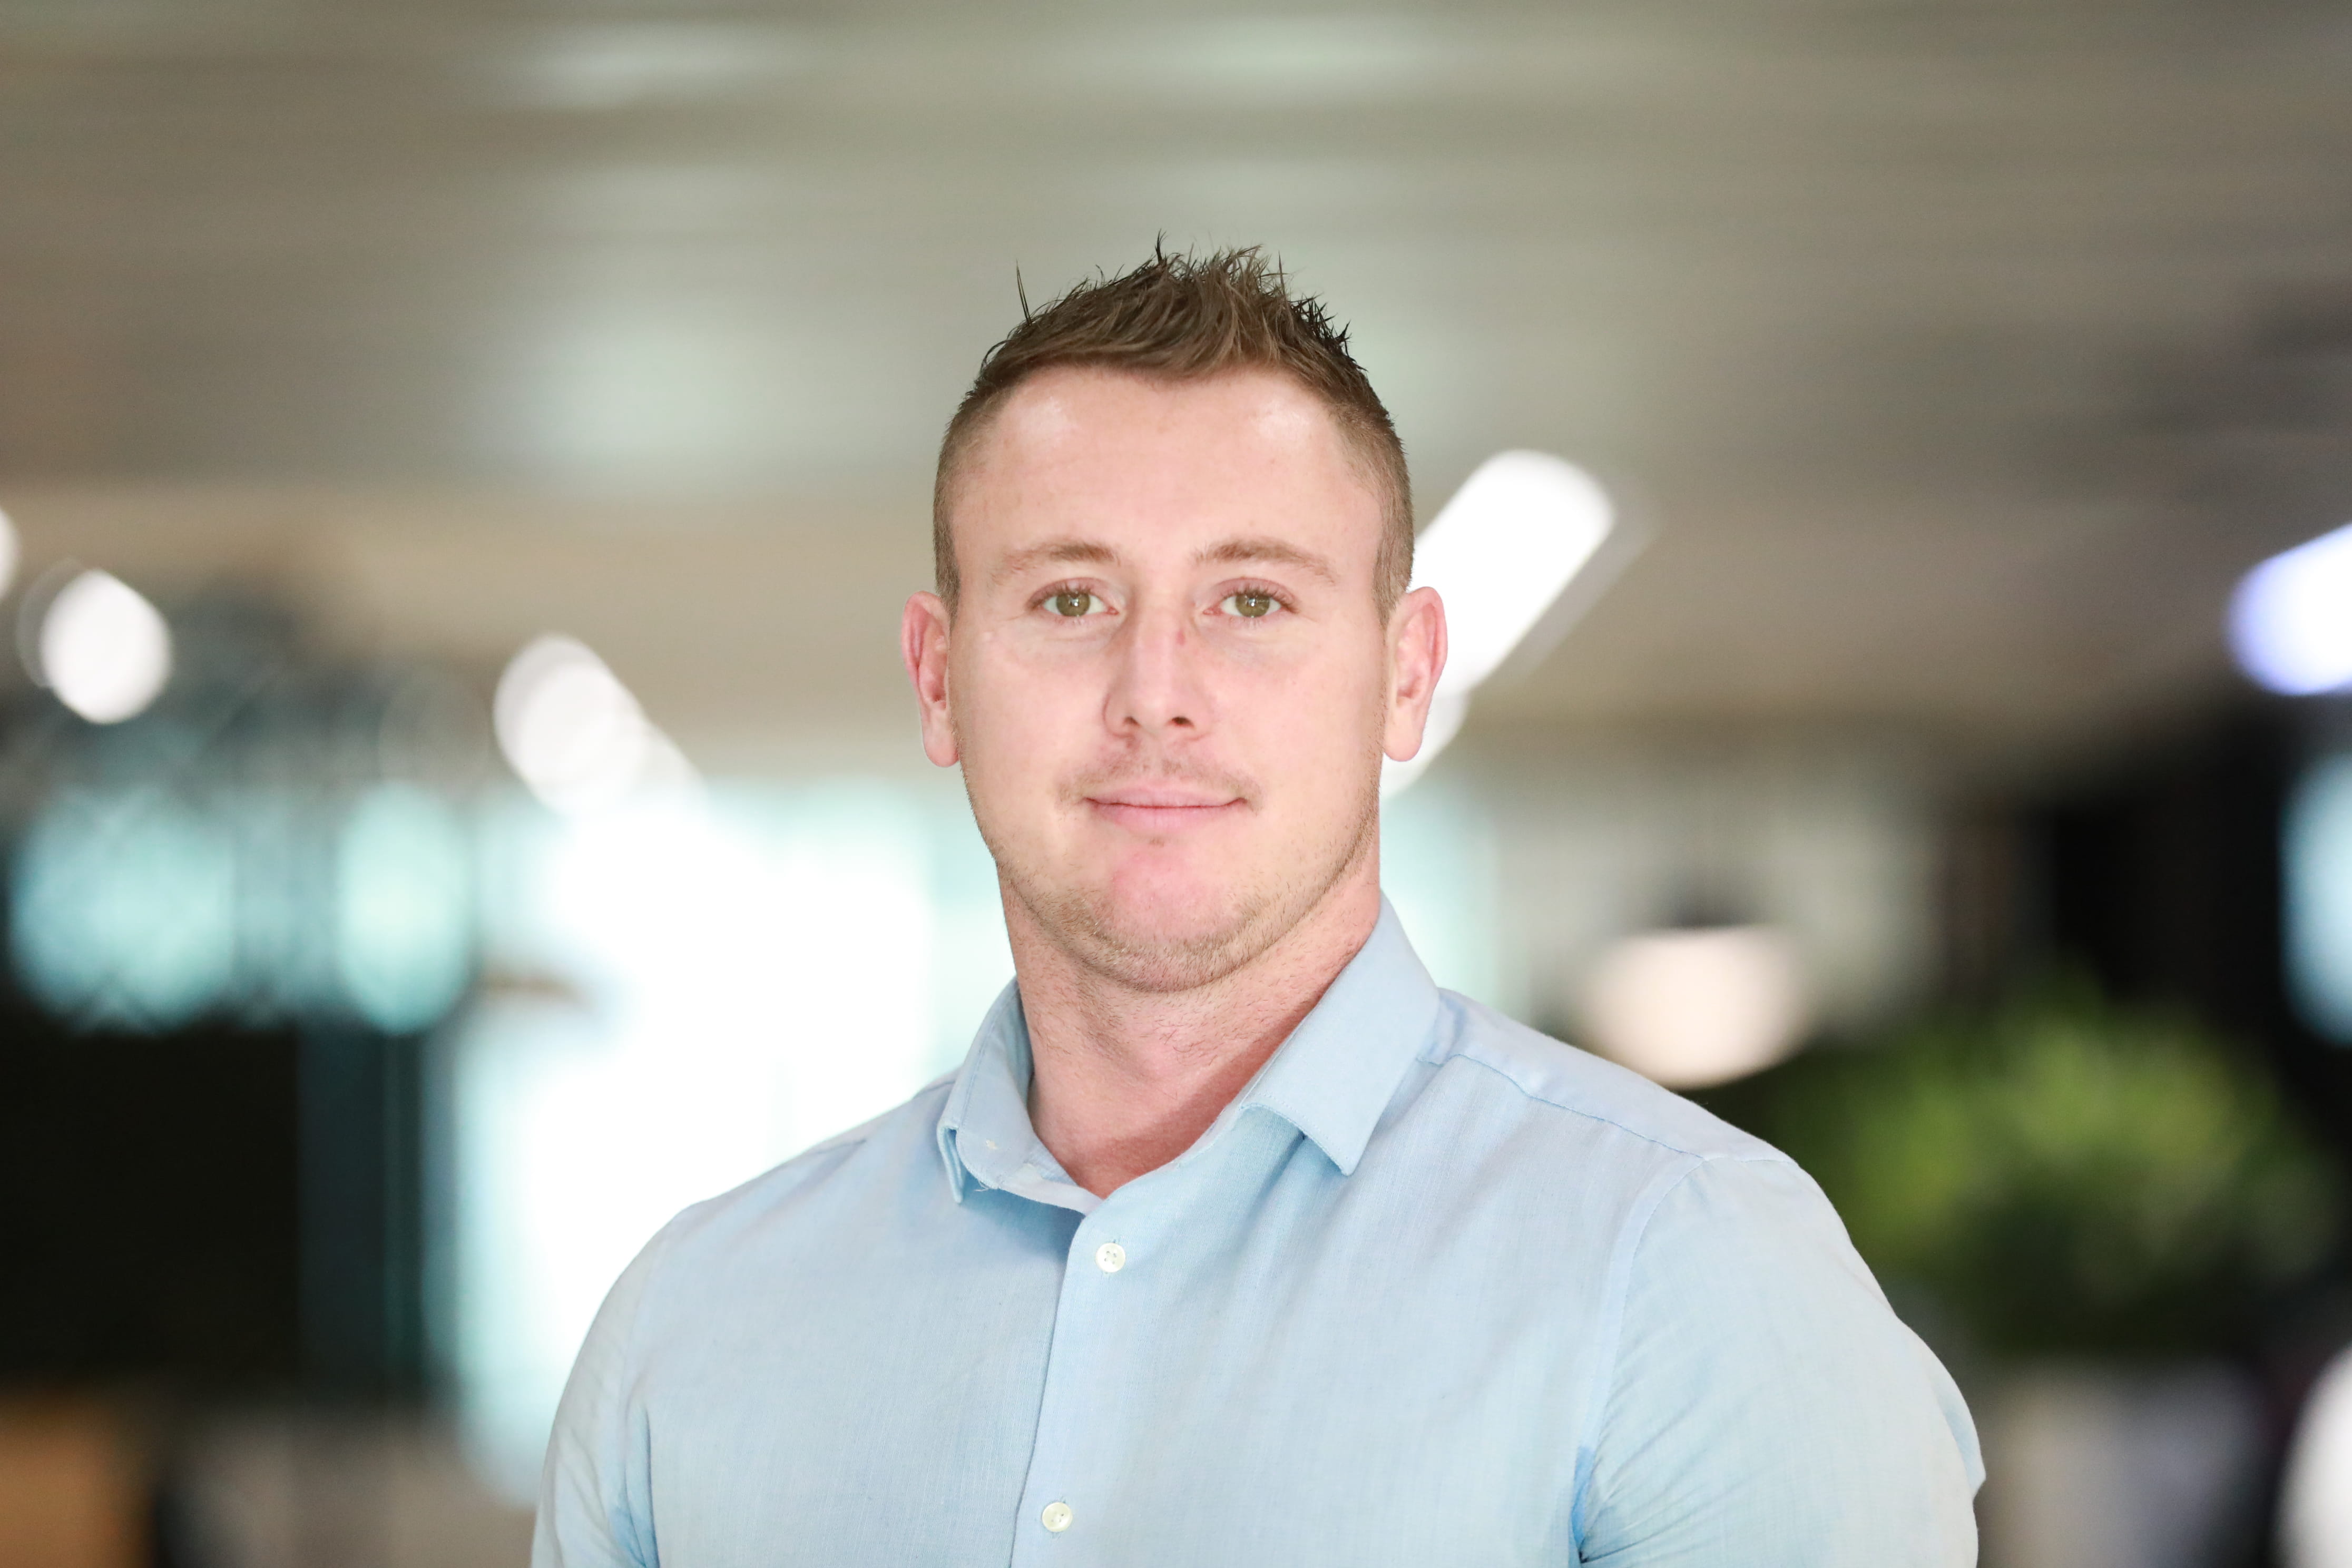 ISG appoints Jake Chadwick as Construction Director MAIN - ISG